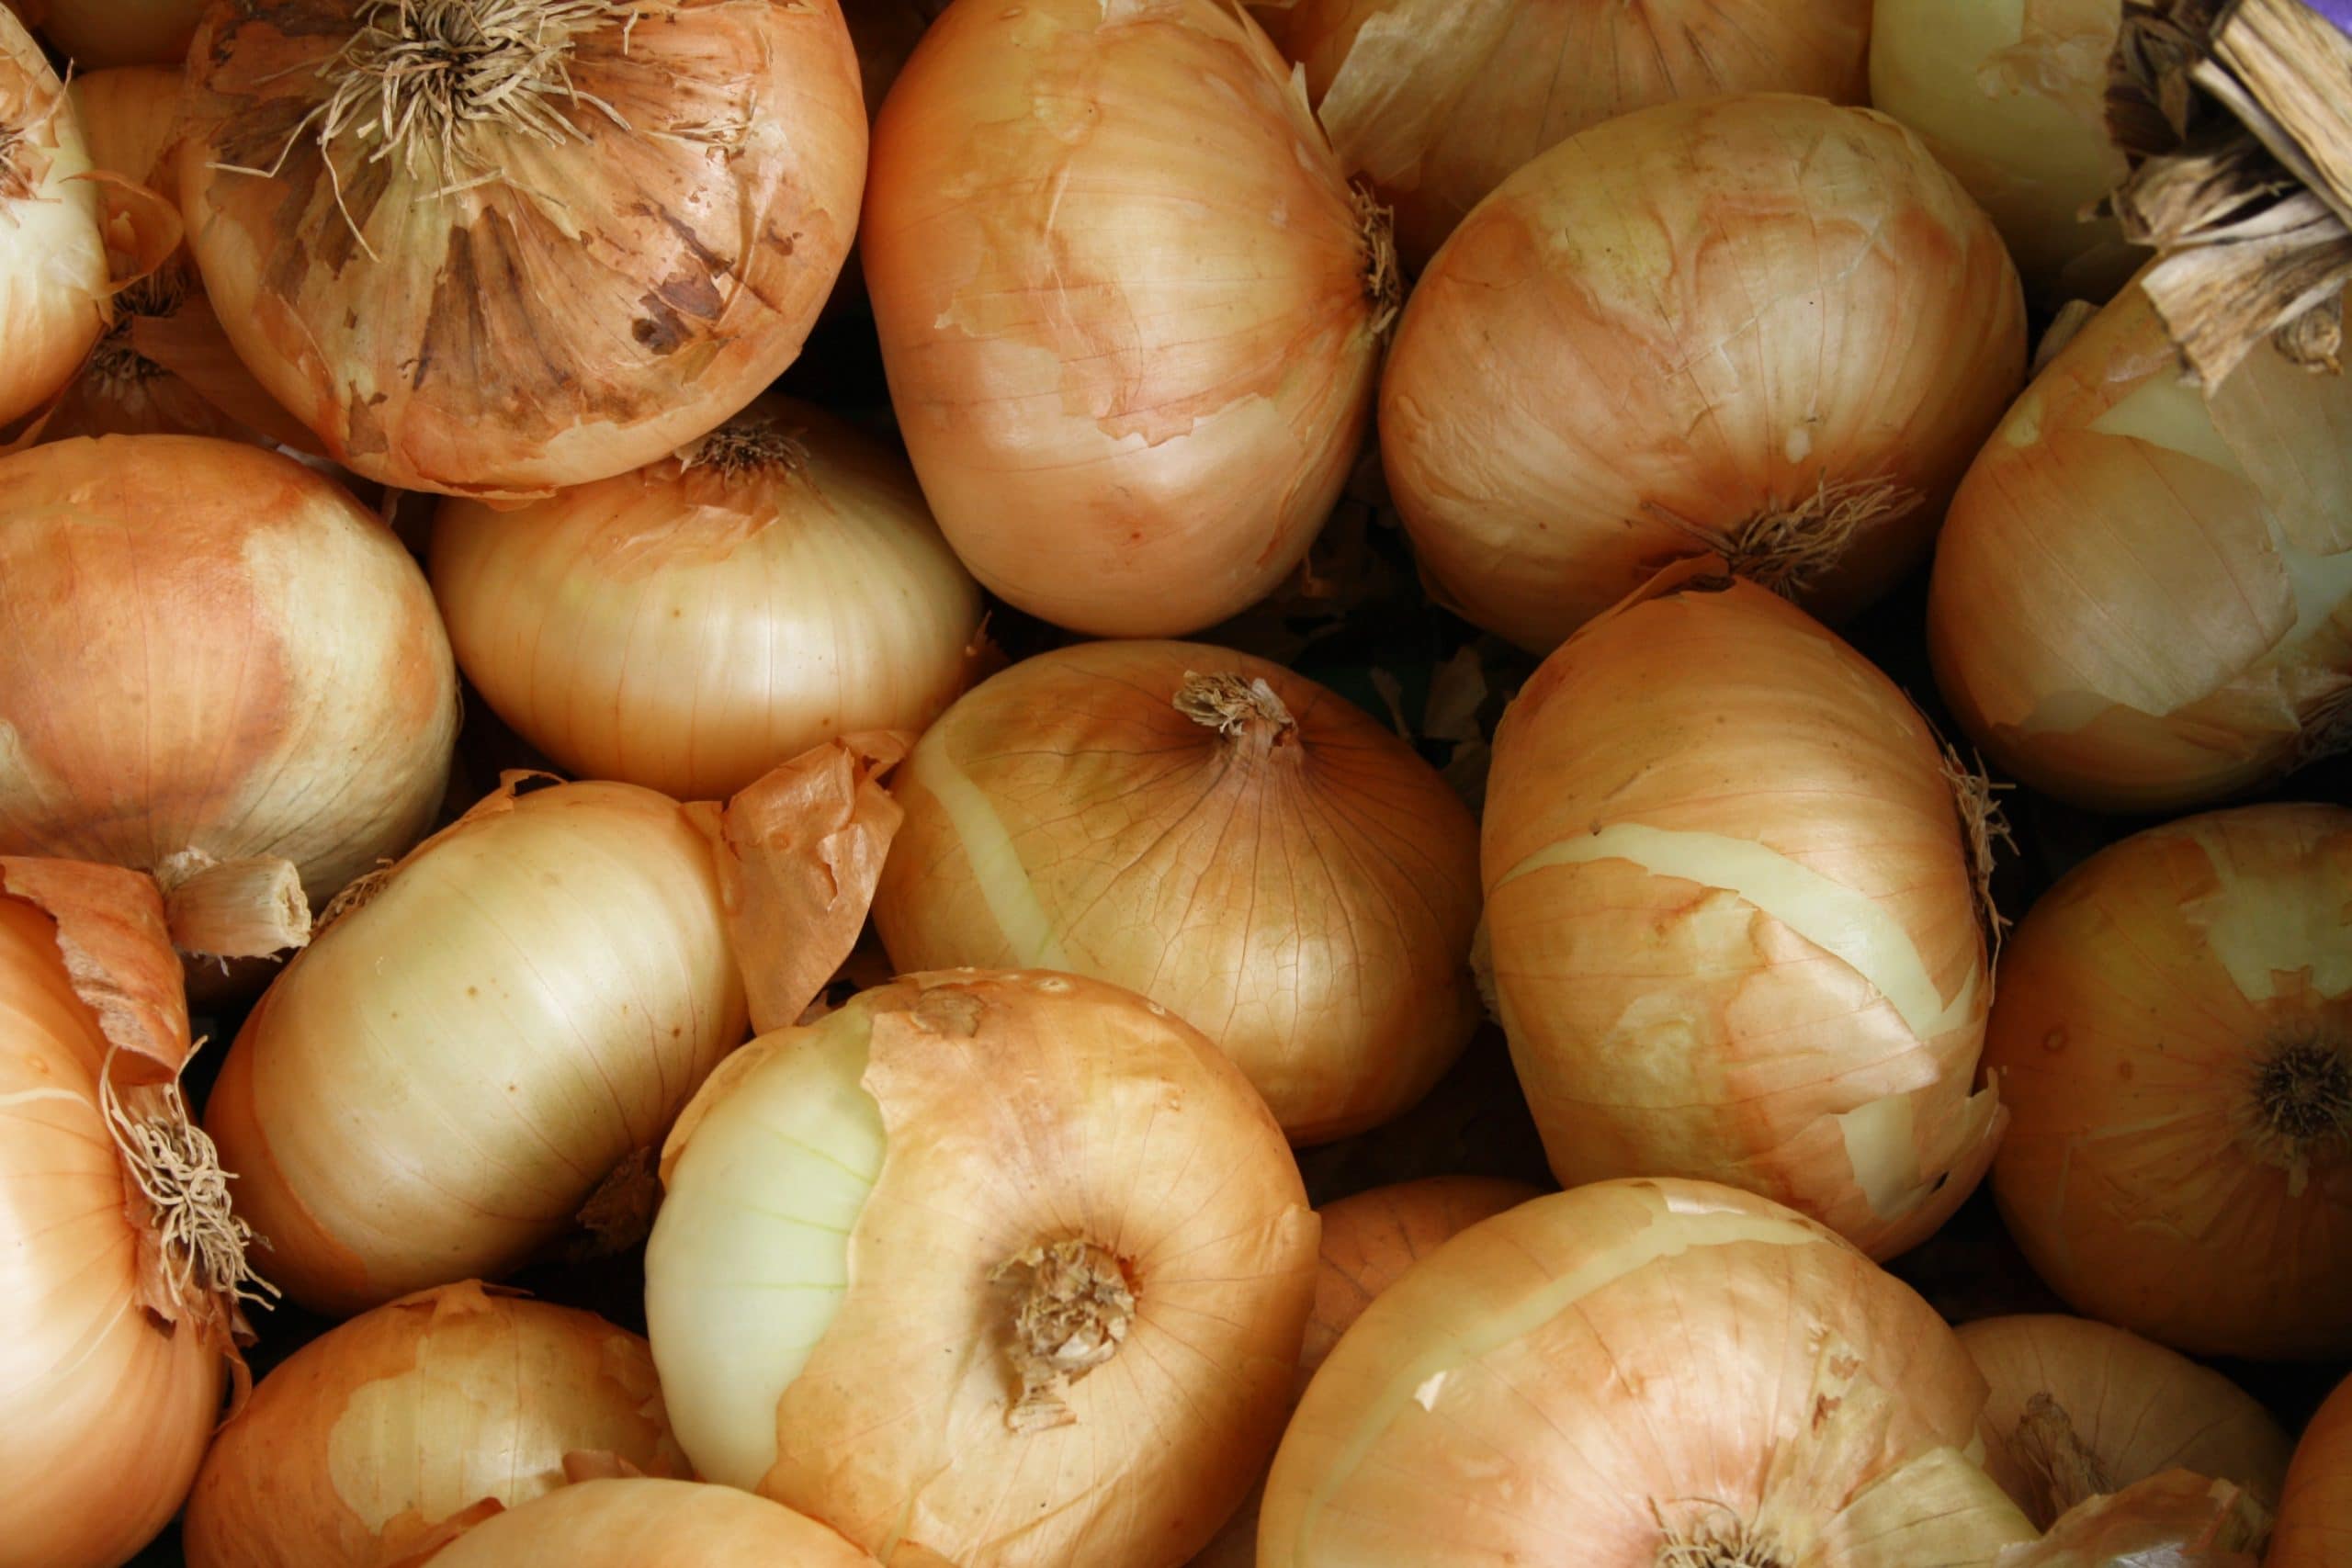 How to tell if a yellow onion is bad